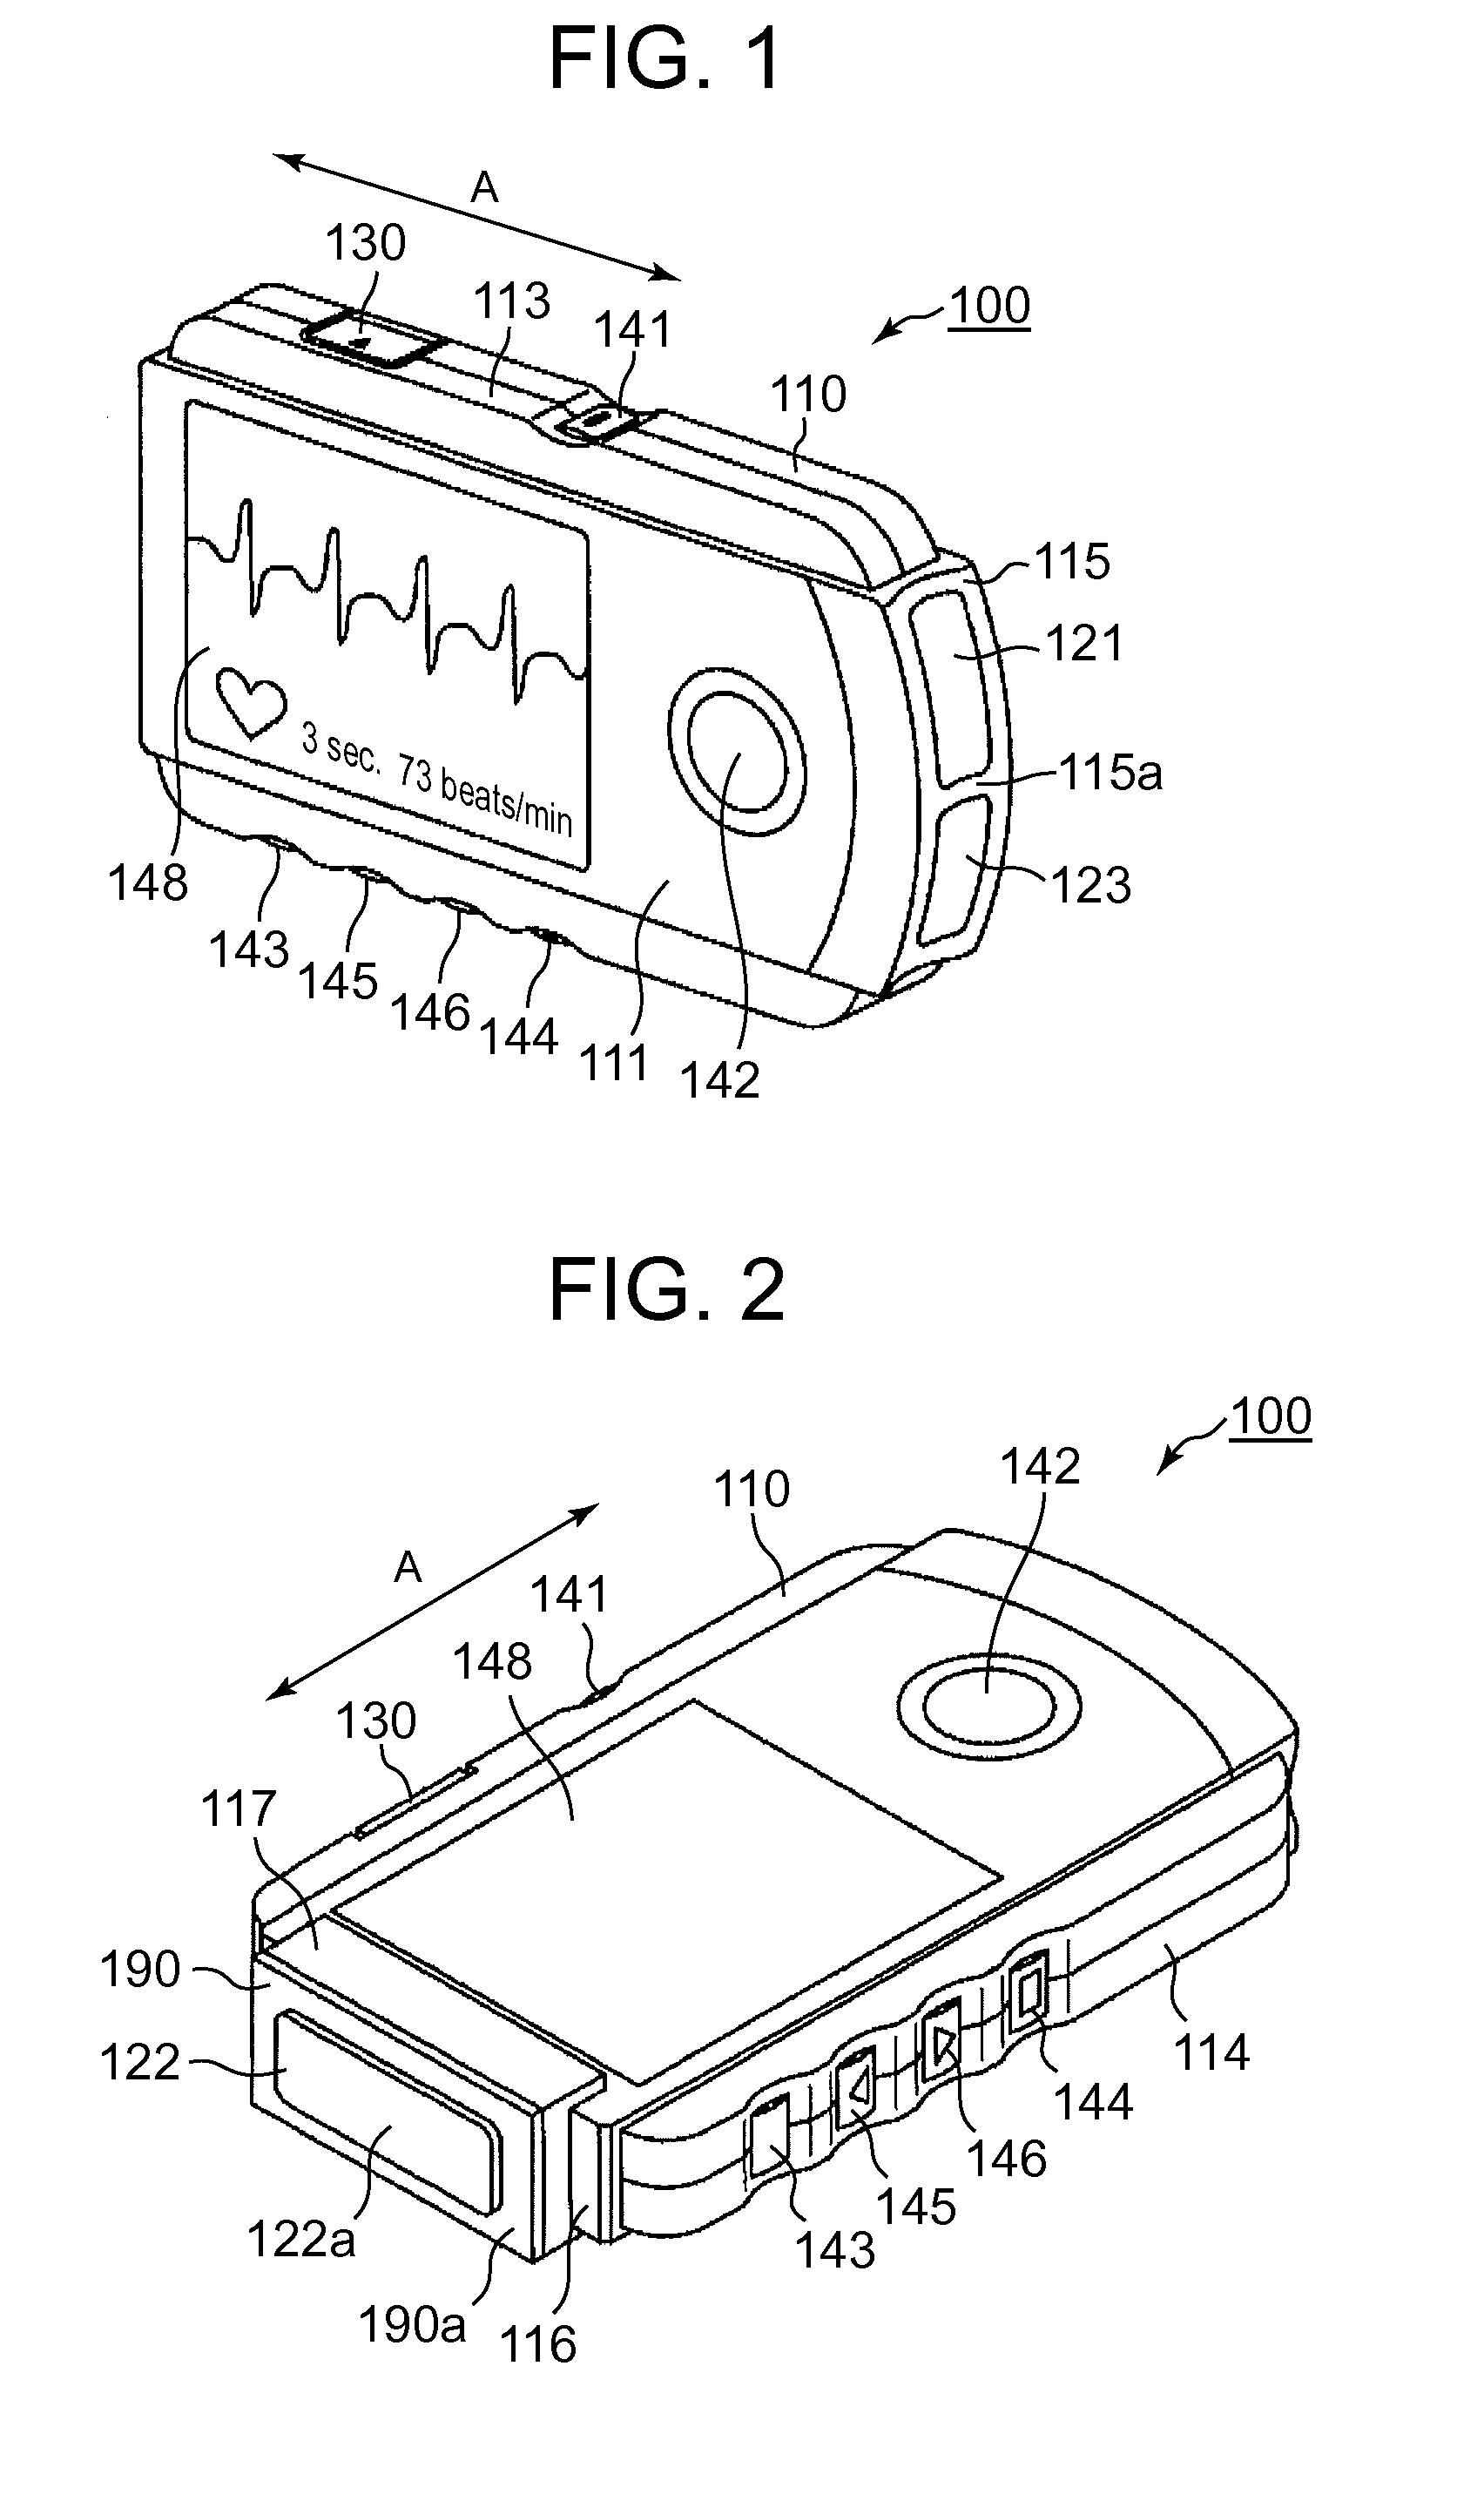 Apparatus for monitoring biological information